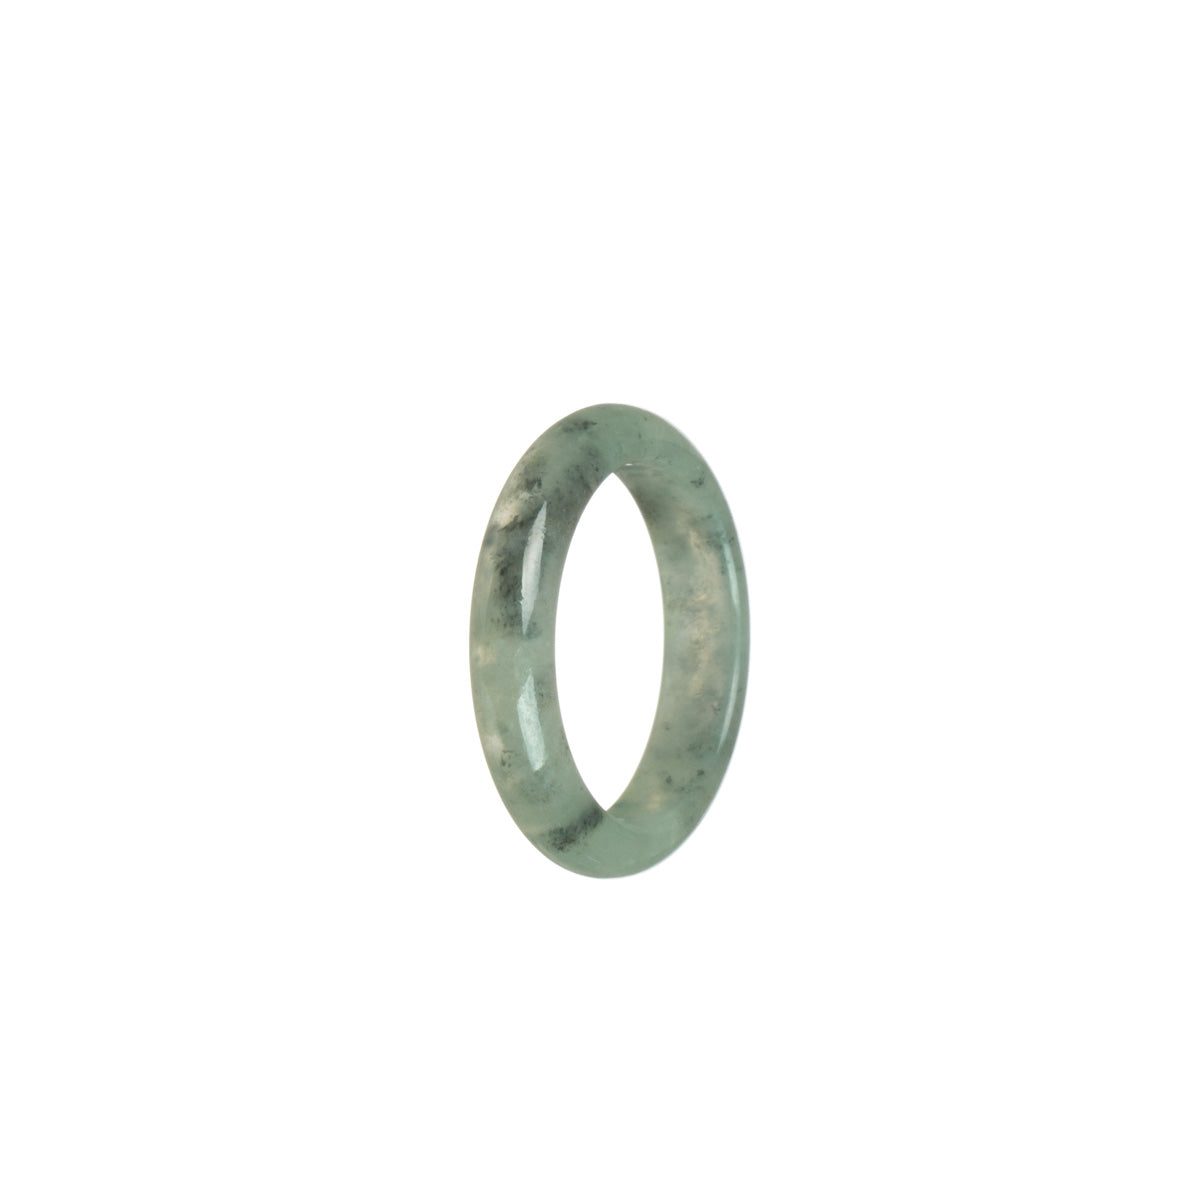 Genuine Icy Greyish green with grey Jade Ring - Size S